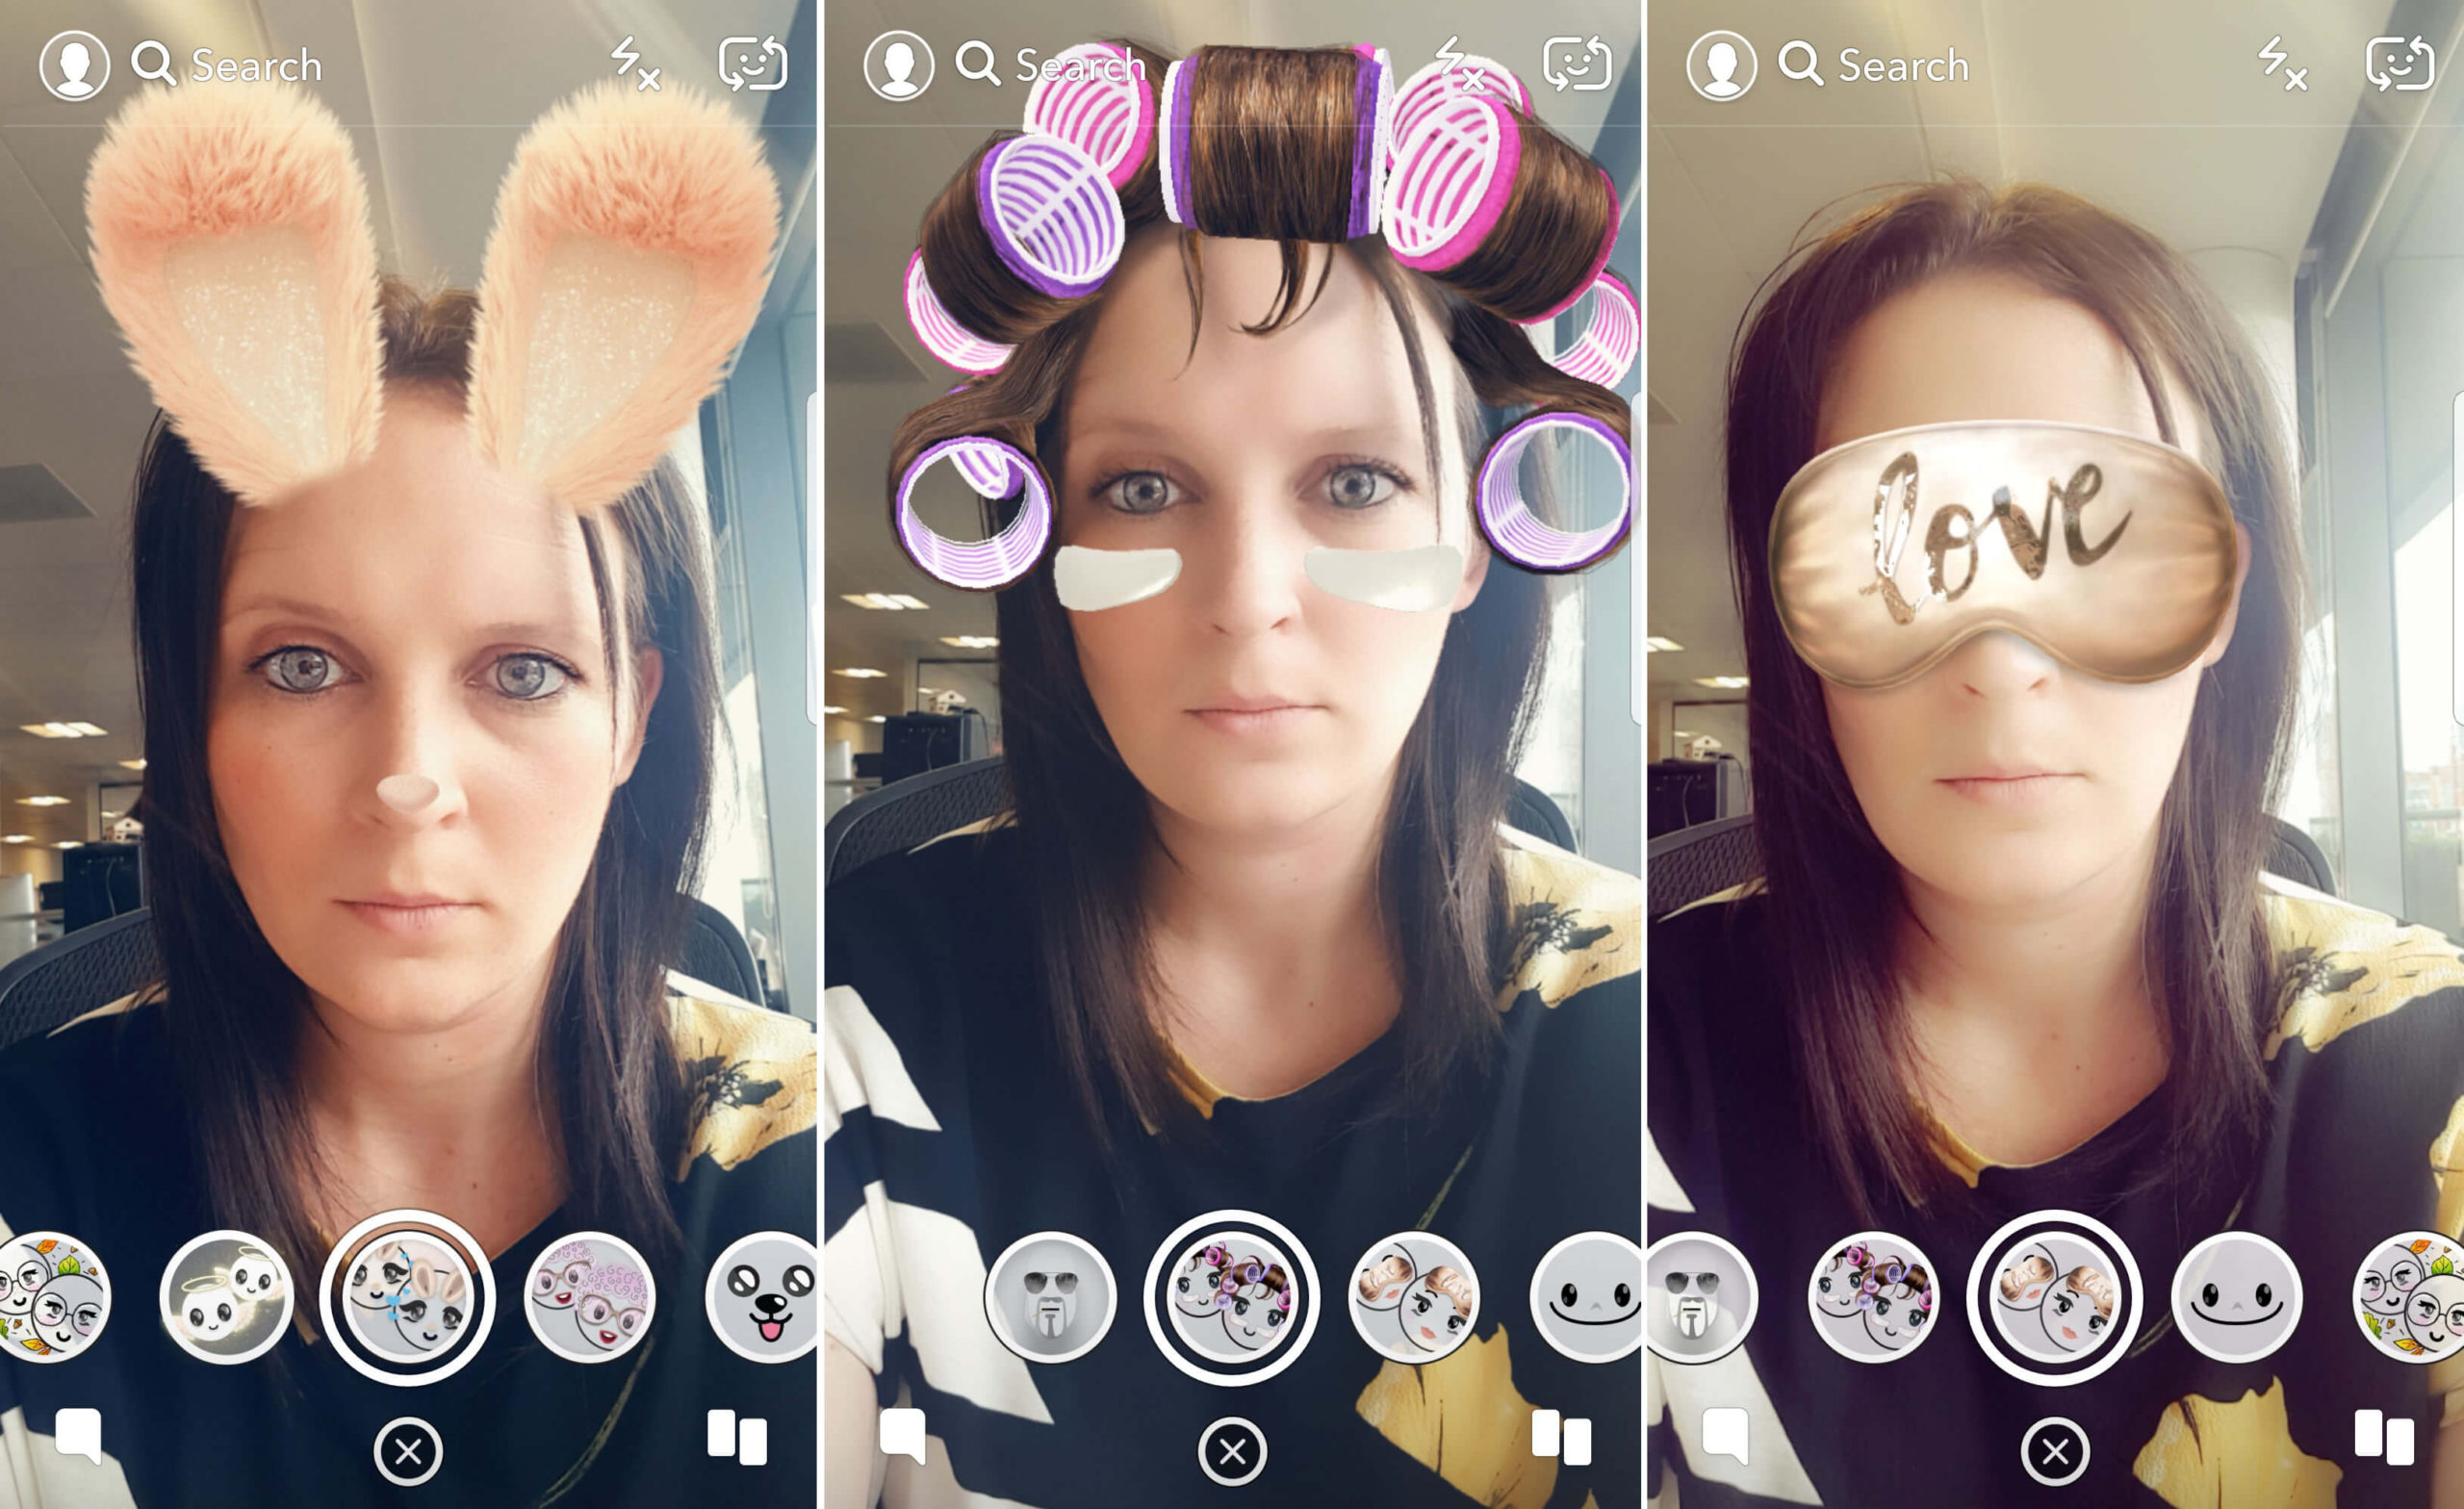 How to make your own Snapchat Filter from Scratch